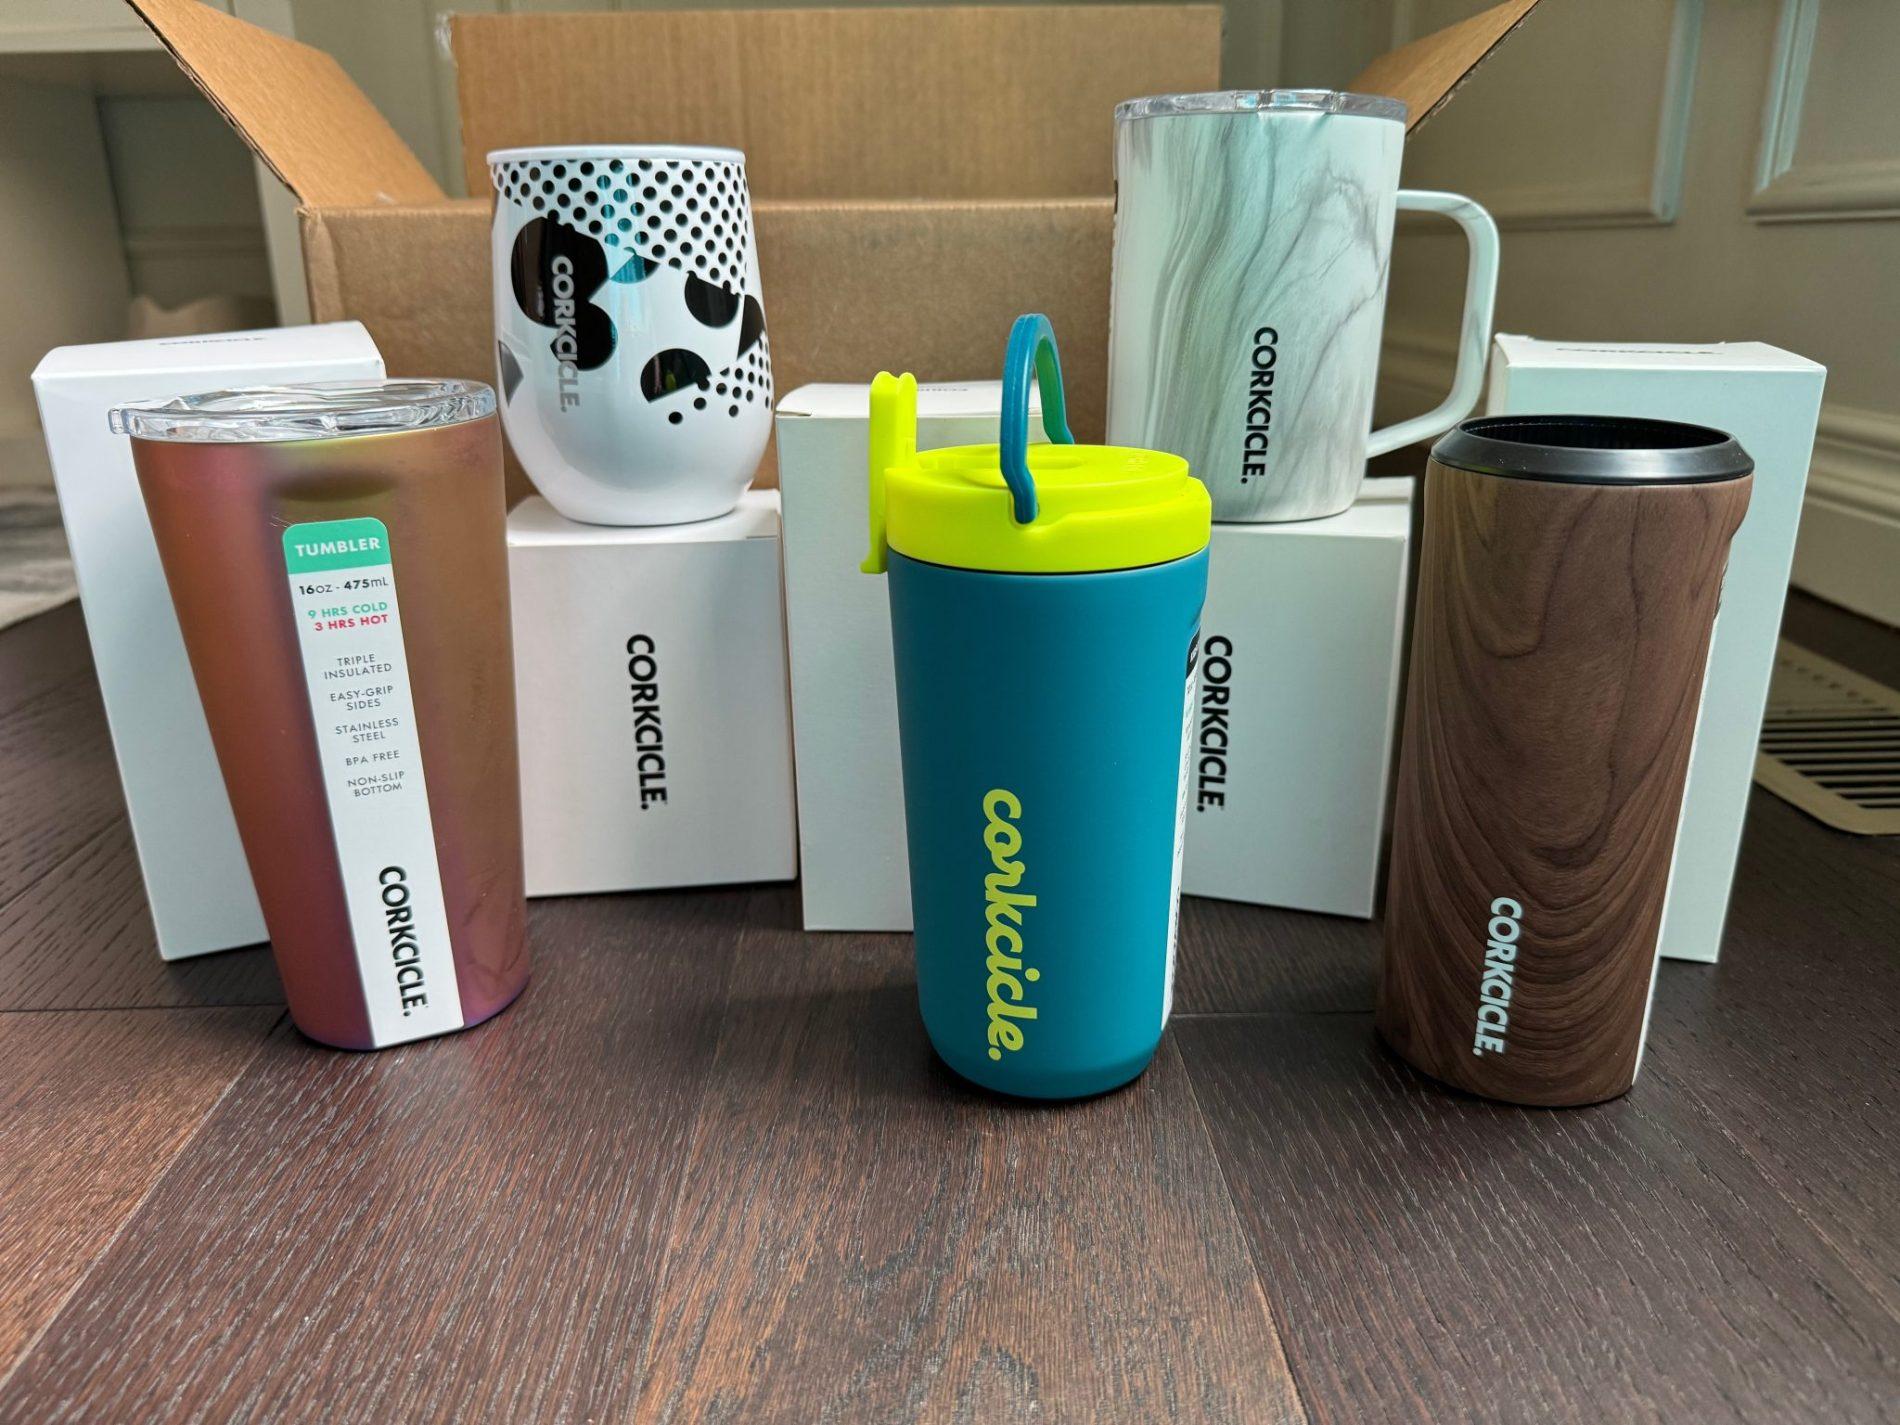 Read more about the article CORKCICLE Mystery Box Review